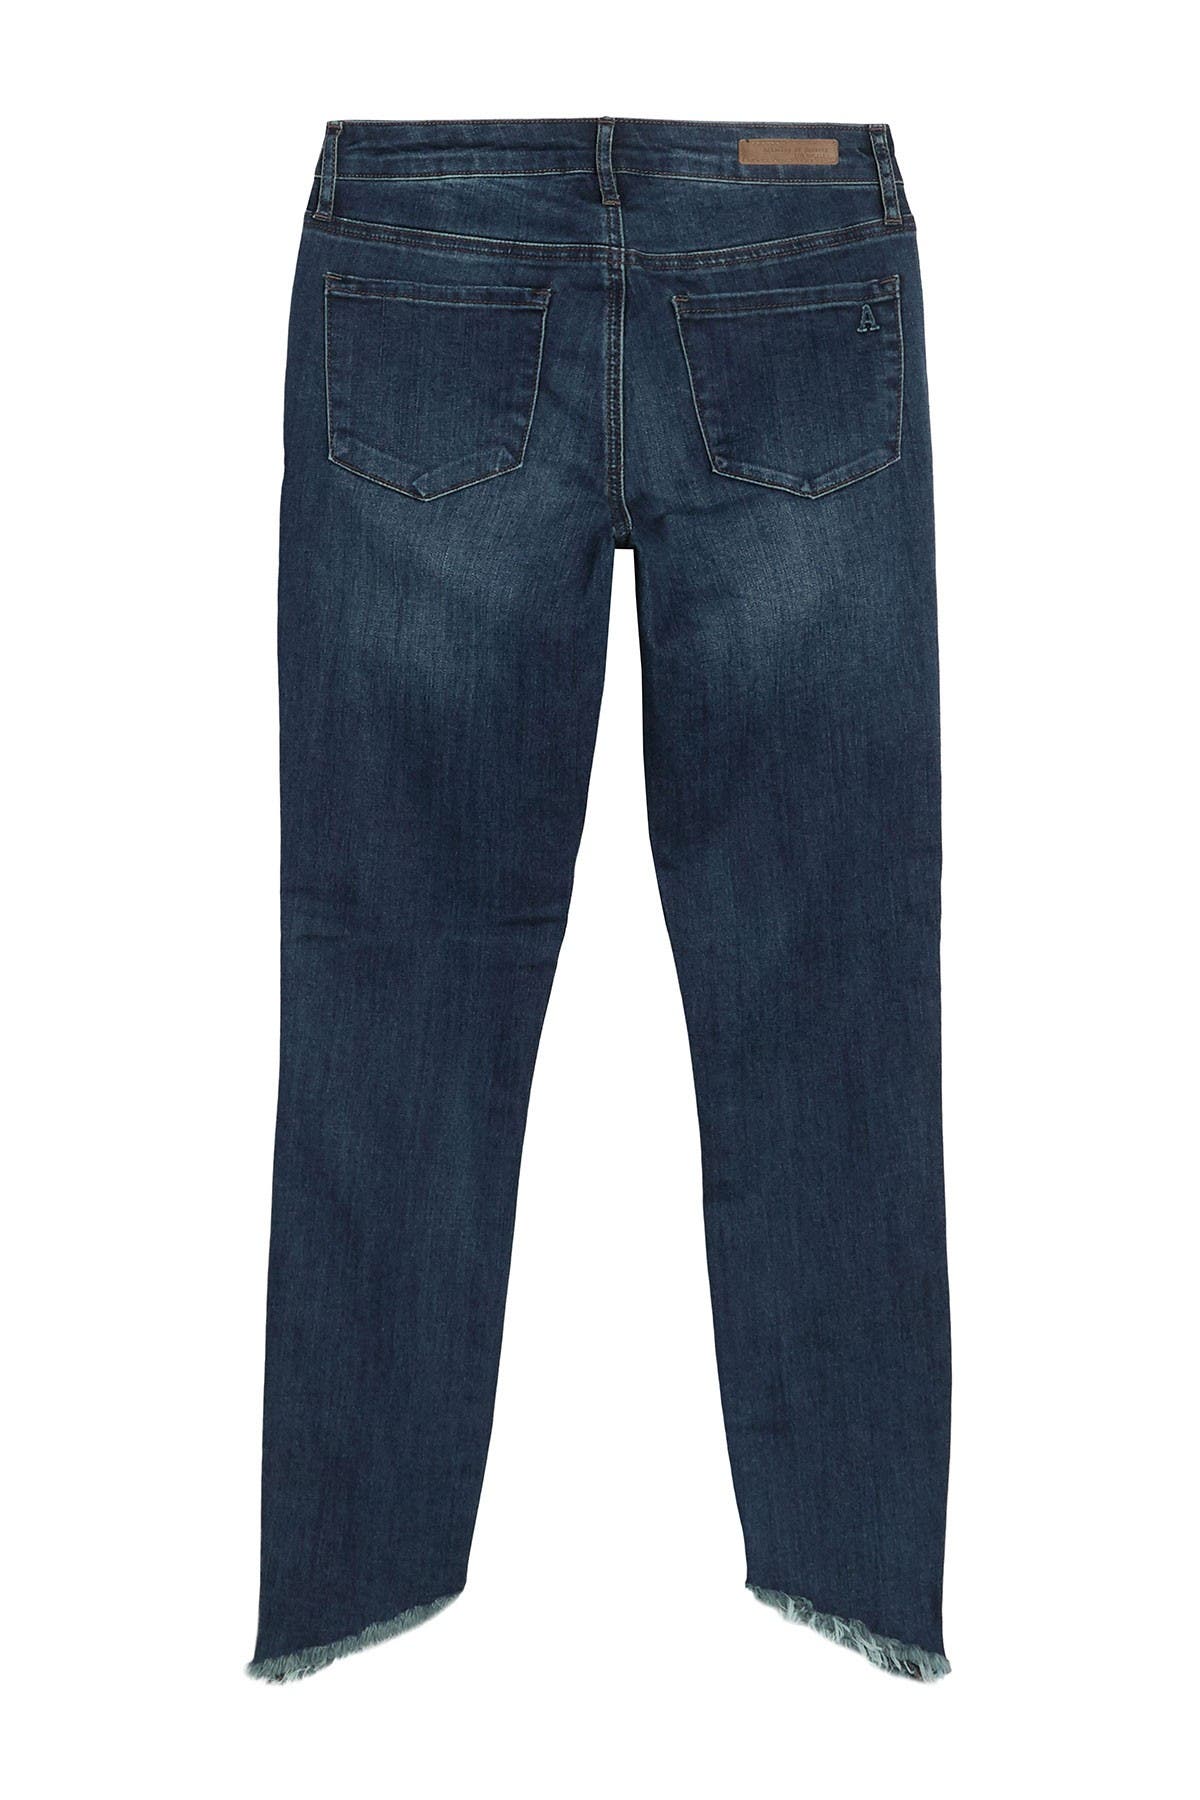 Articles Of Society Suzy Cropped Jeans In Medium Blue4